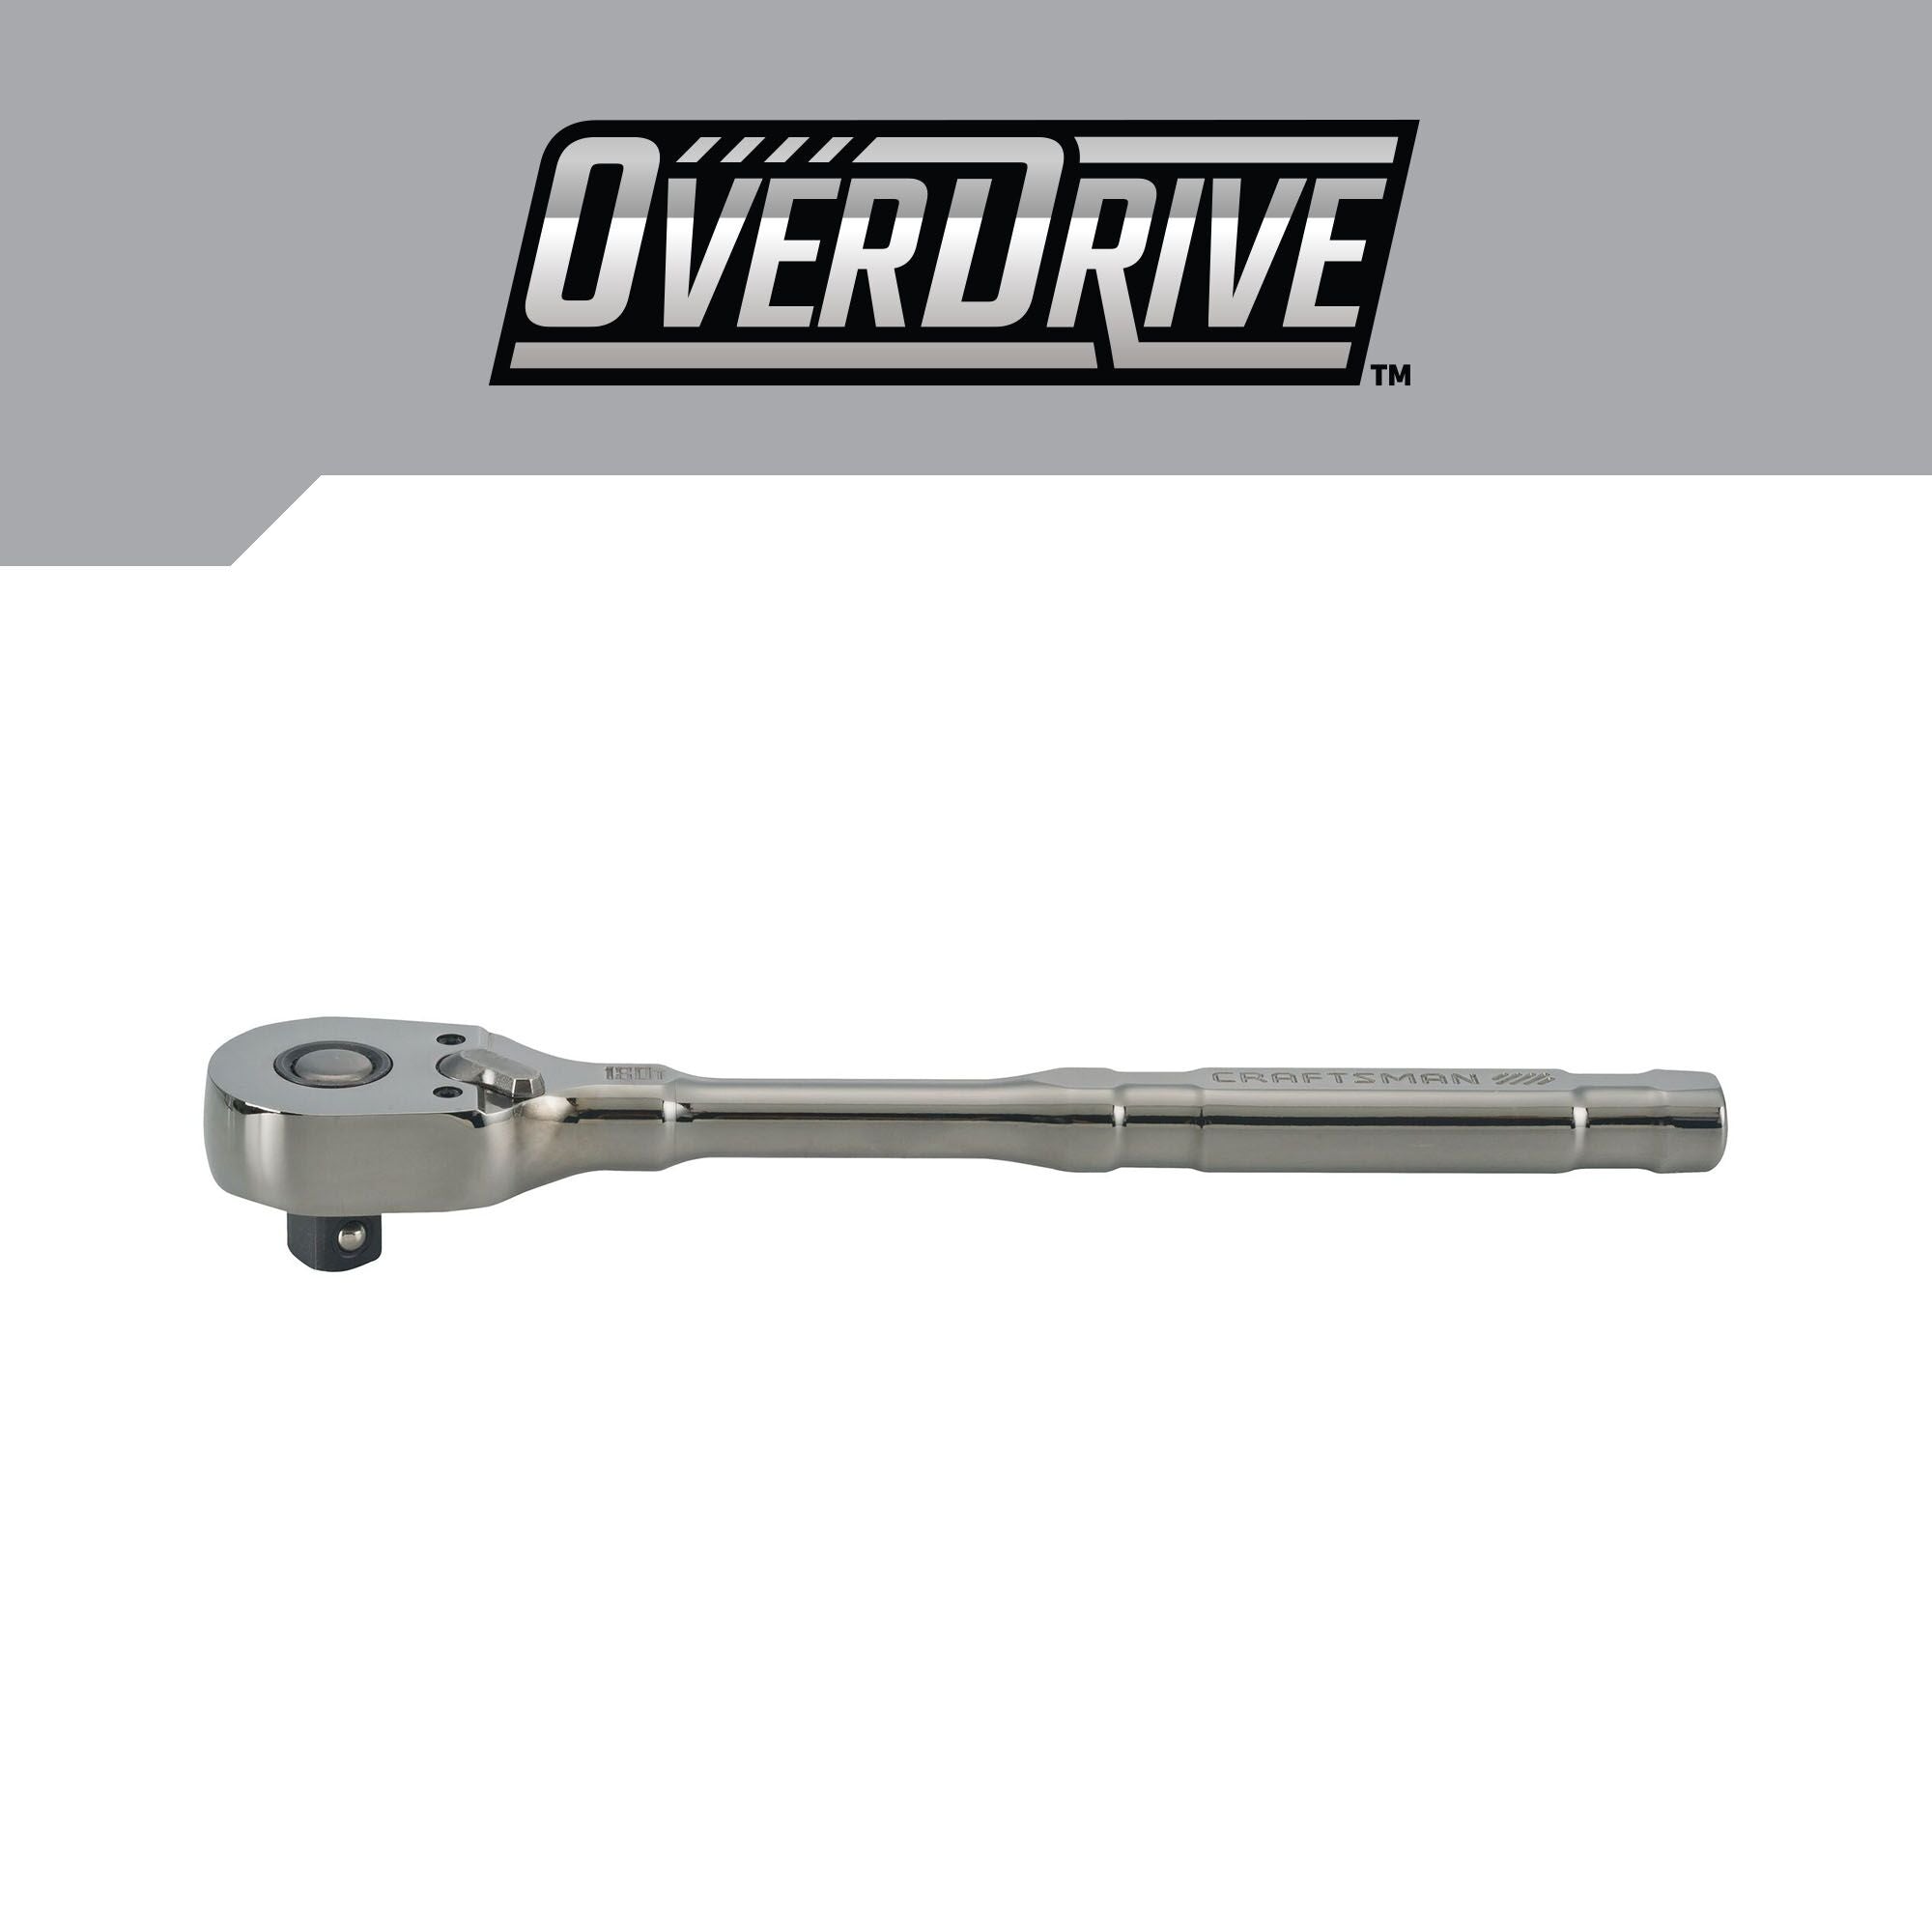 CRAFTSMAN OVERDRIVE 3/8 INCH DRIVE RATCHET on white background